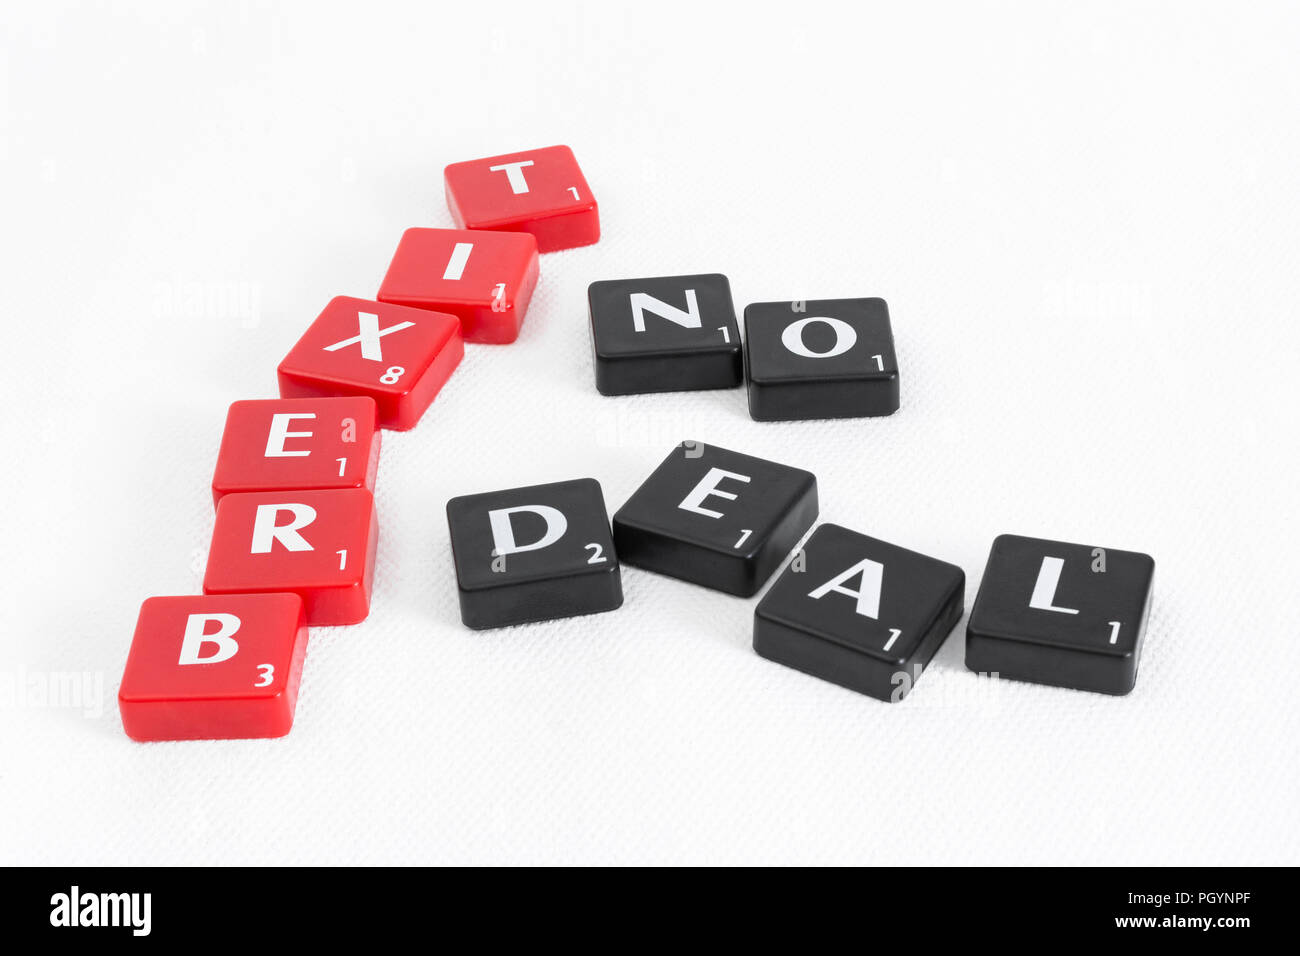 BREXIT / Brexit negotiations end game - deal or no deal? Letter tiles on textured neutral backdrop. EU UK relationship concept, No-Deal Brexit. Stock Photo